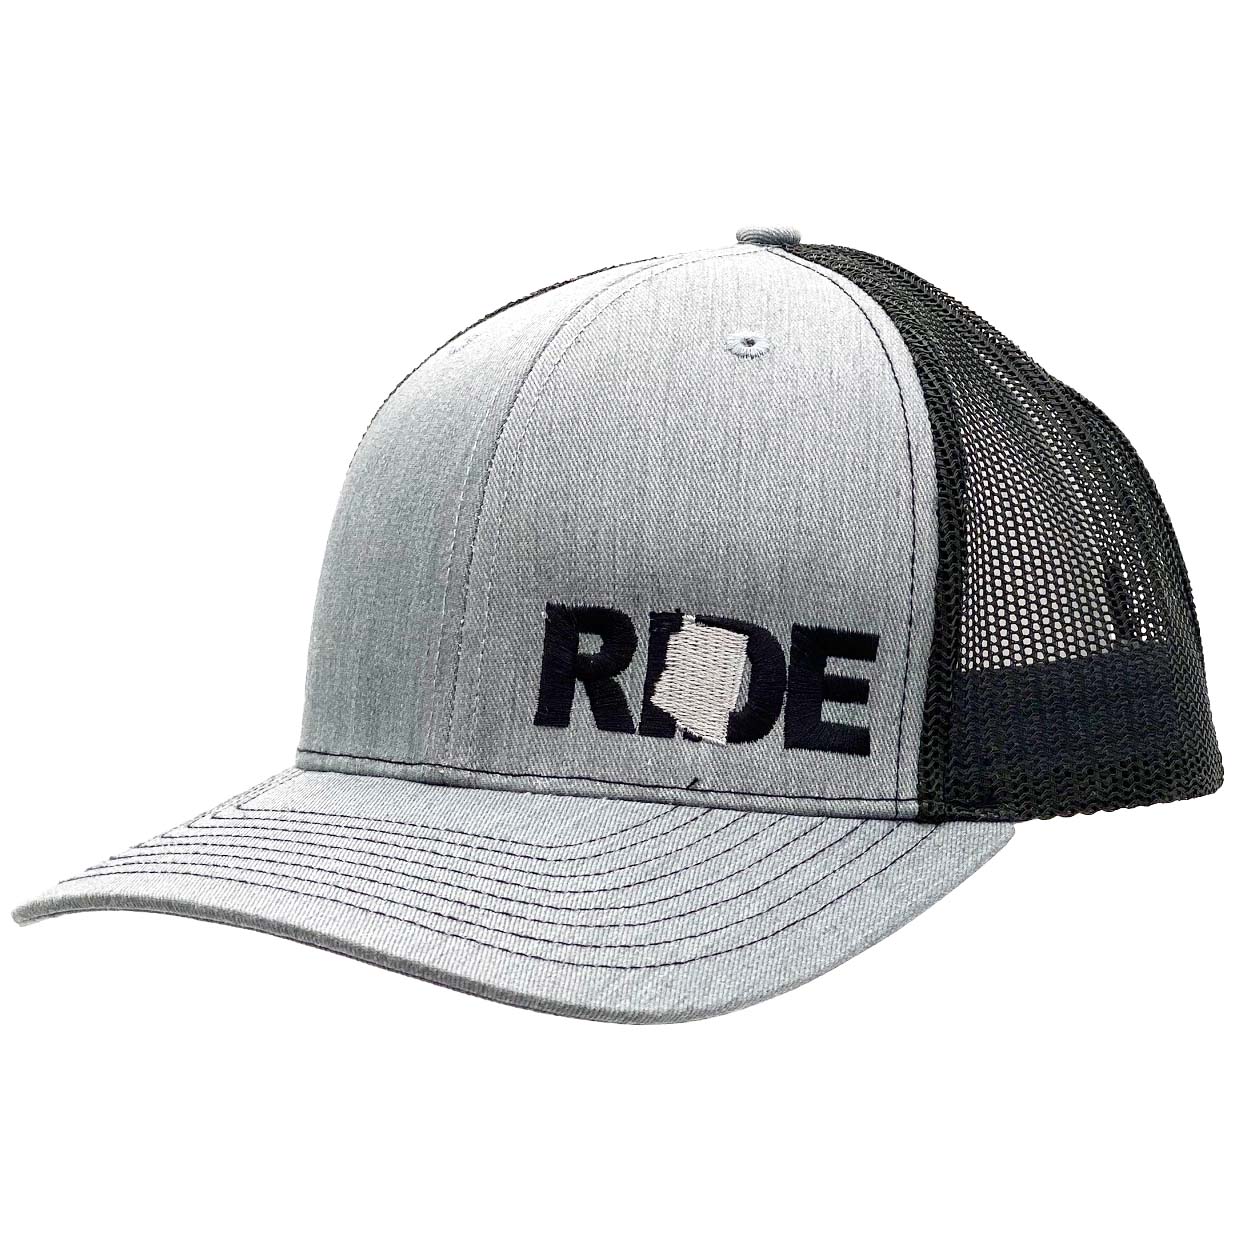 Ride Arizona Night Out Embroidered Snapback Trucker Hat Heather Gray/Black